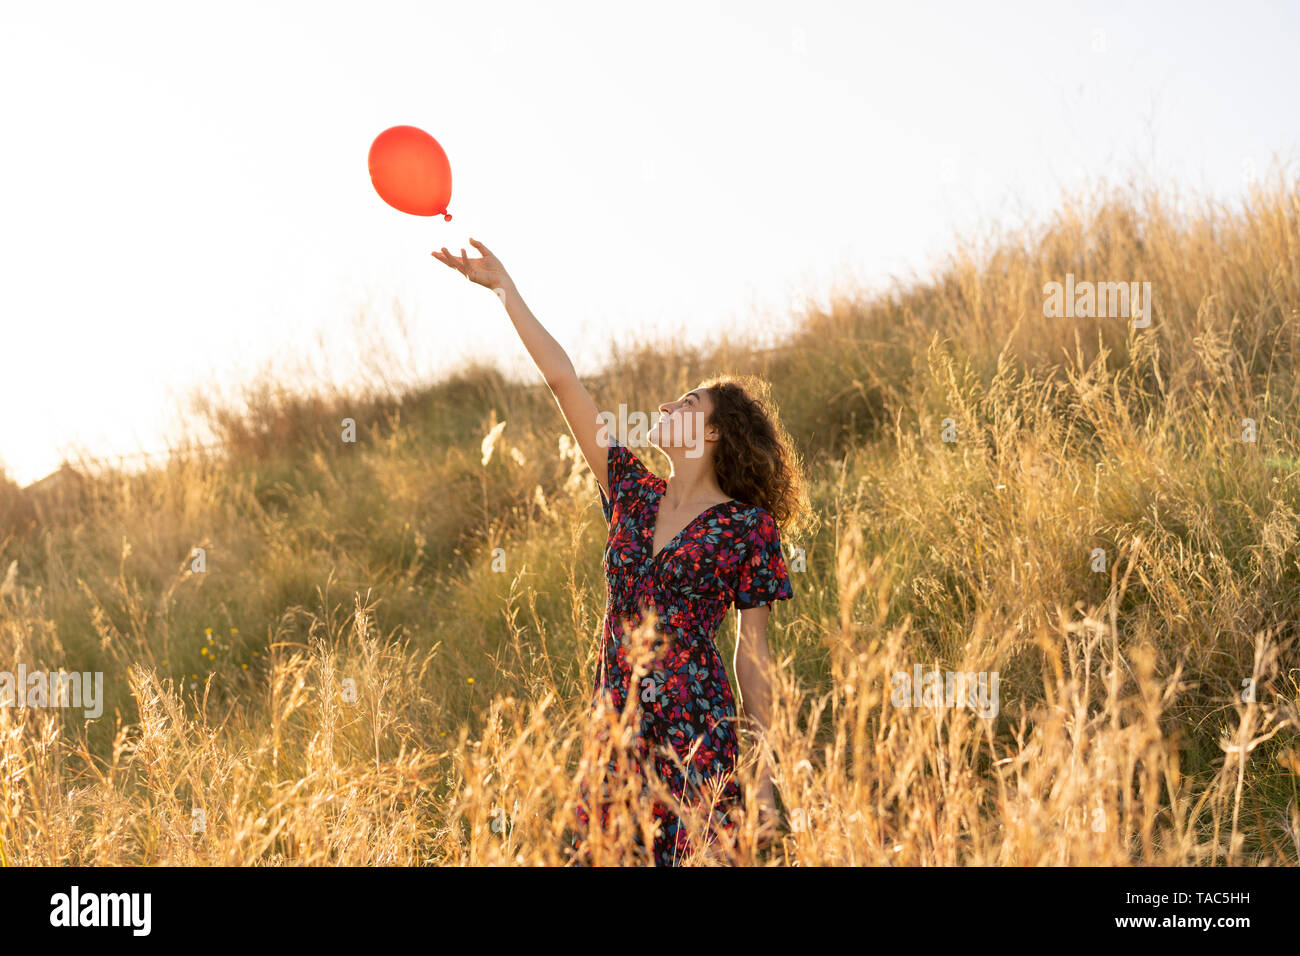 Happy young woman standing in summer meadow, letting go of a red balloon Stock Photo